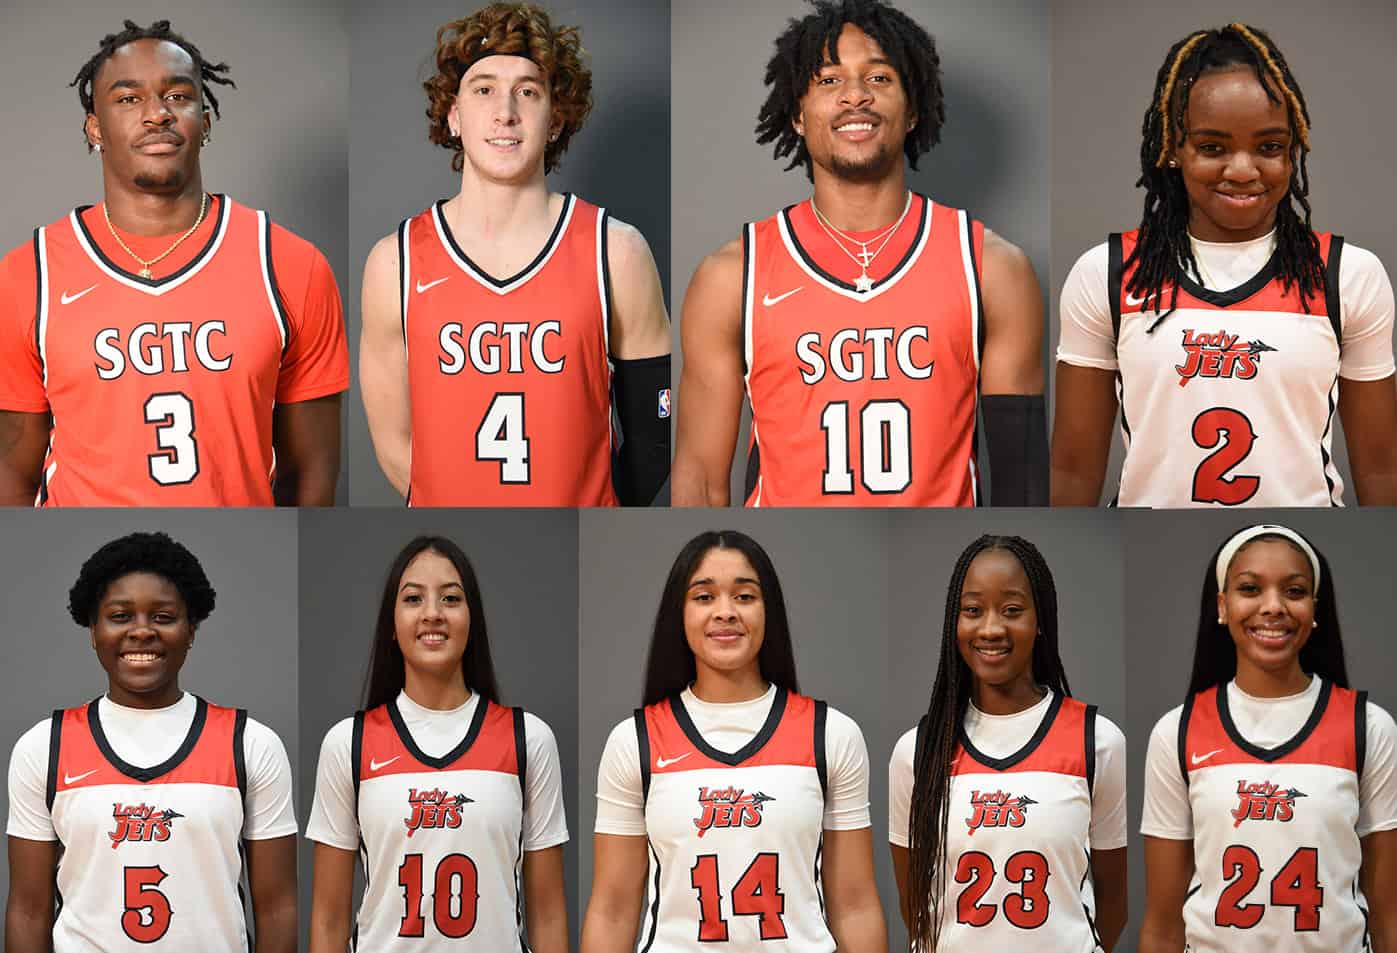 Shown above on the top row are the SGTC Jets and Lady Jets sophomores who earned individual recognition this week in the NJCAA rankings. Shown (l to r) are Jalen Reynolds (3), Will Johnston (4), Marvin McGhee, III, (10), and Maikya Simmons (2). On the bottom row are freshmen, Alexia Dizeko (5), Susan Posada Yepes (10), Laurie Calixte (14), Fanta Gassama (23), and Camryn James (24).